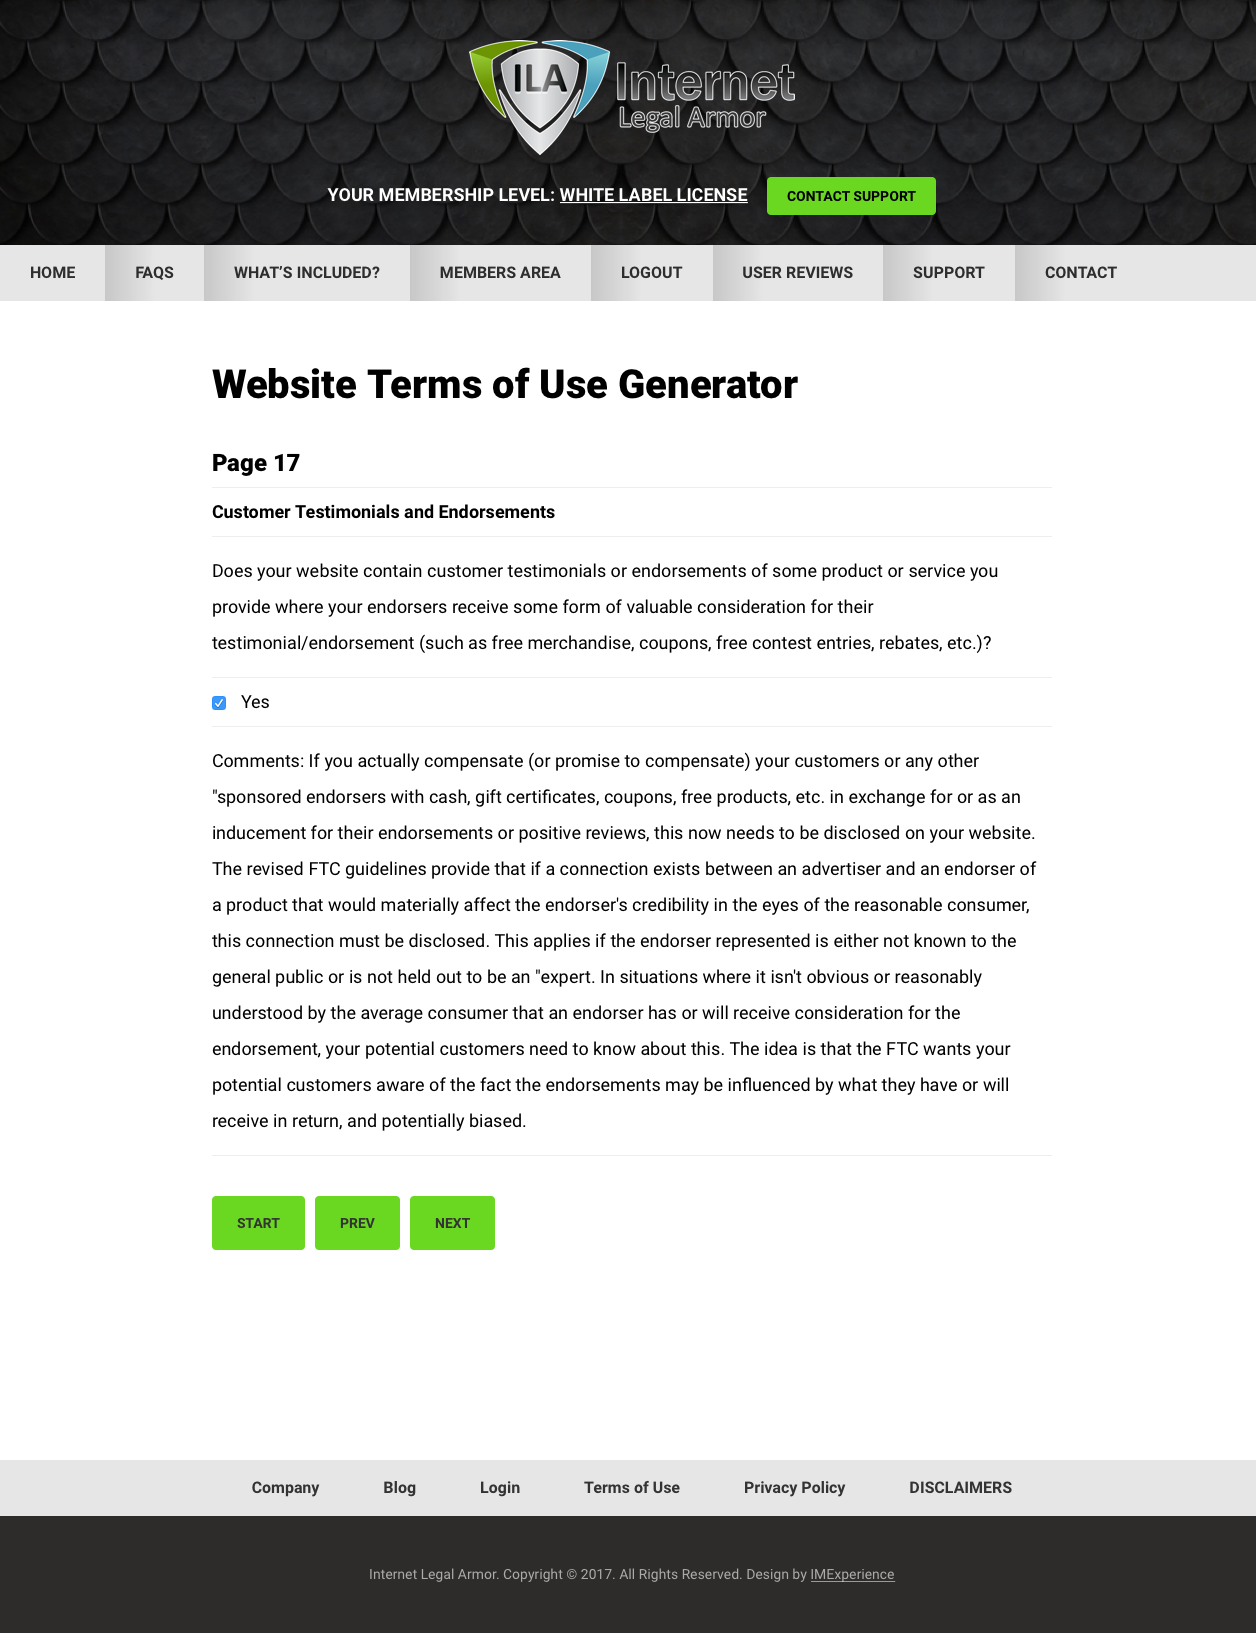 Website Terms Of Use Generator General Visitor Use 